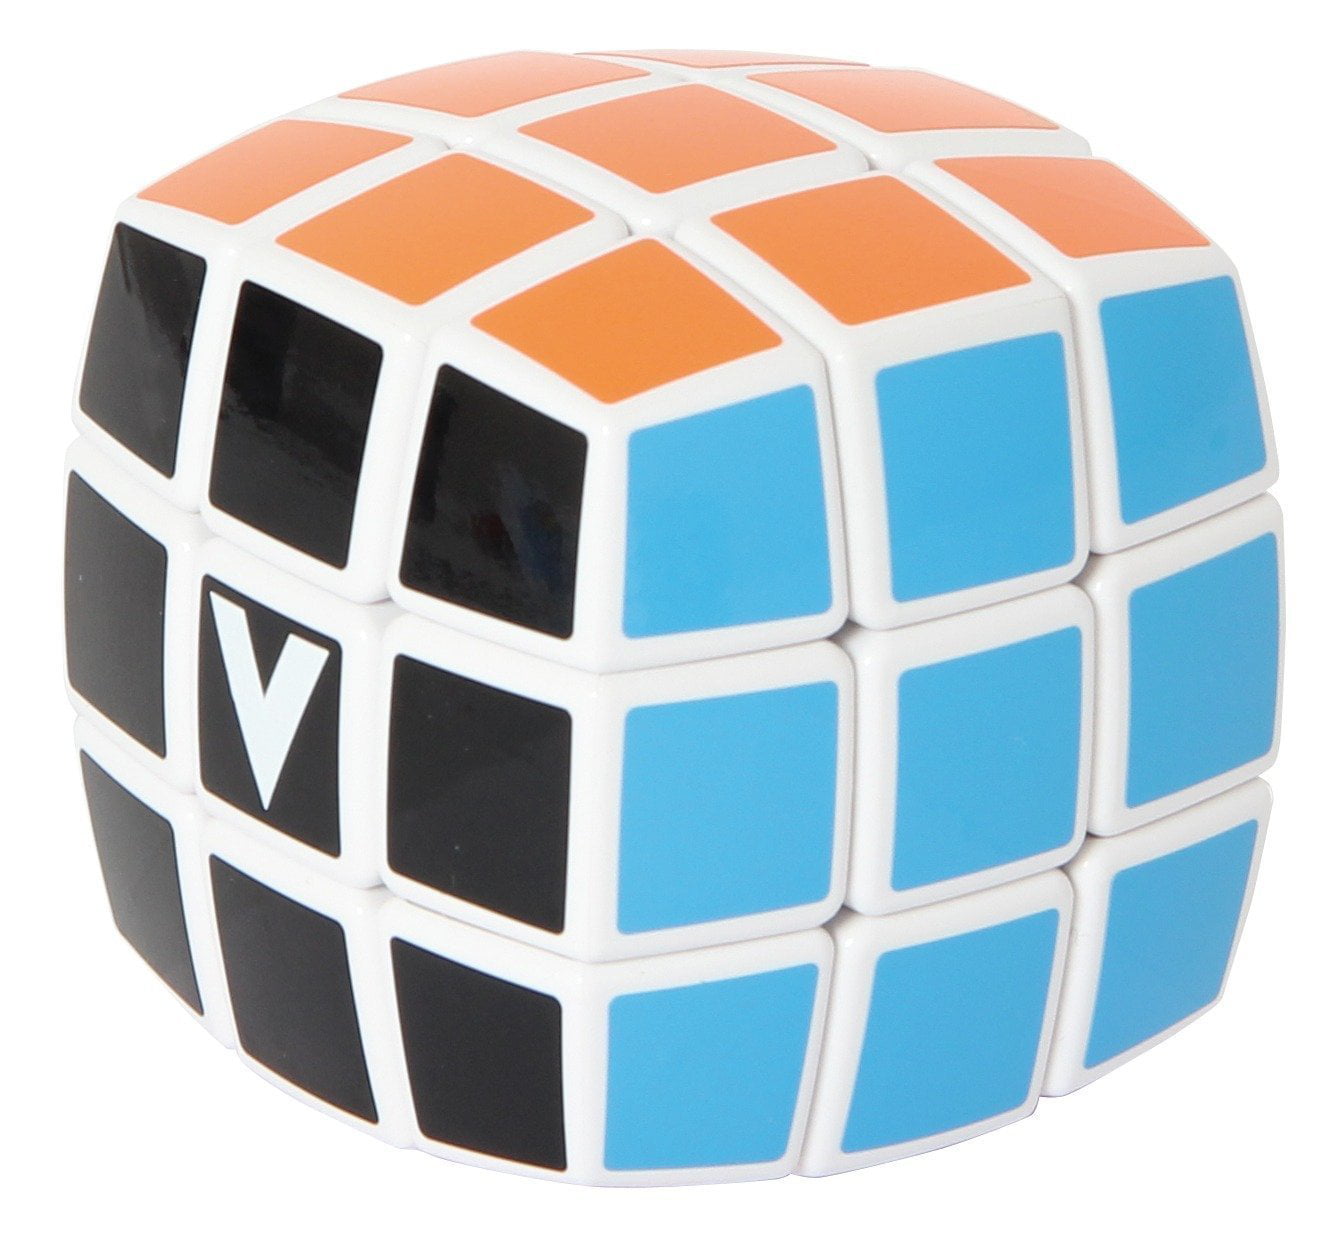 V-Cube Skill Twisting Puzzle Square Toy Smooth Rotation & Speed-Various Sizes 